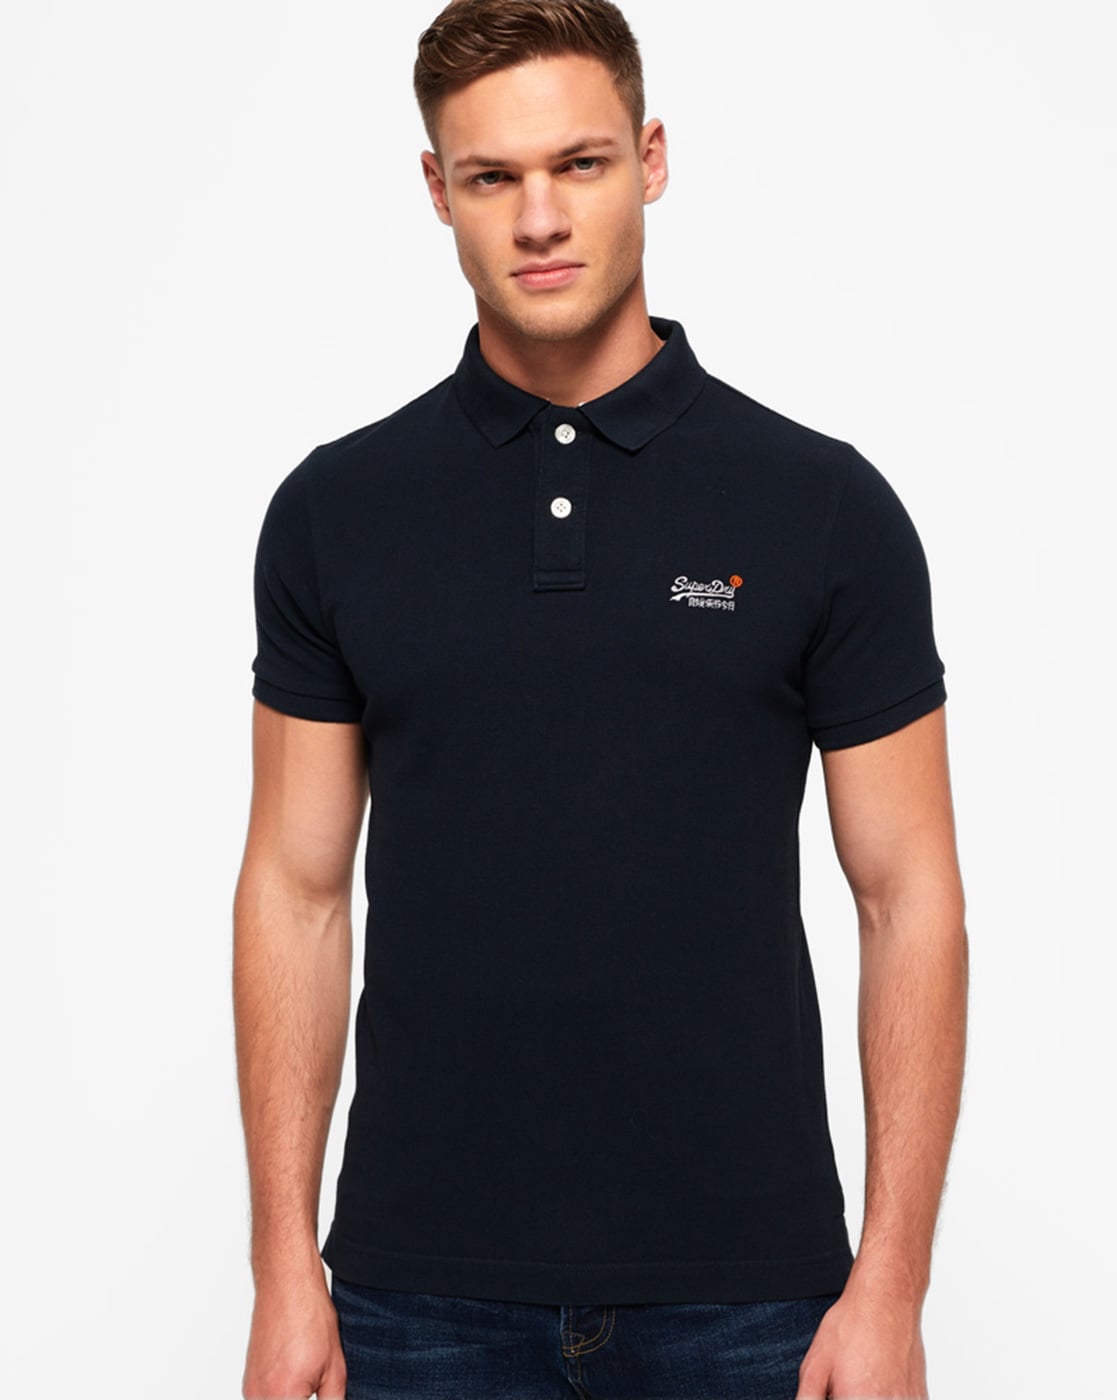 polo t shirt pictures